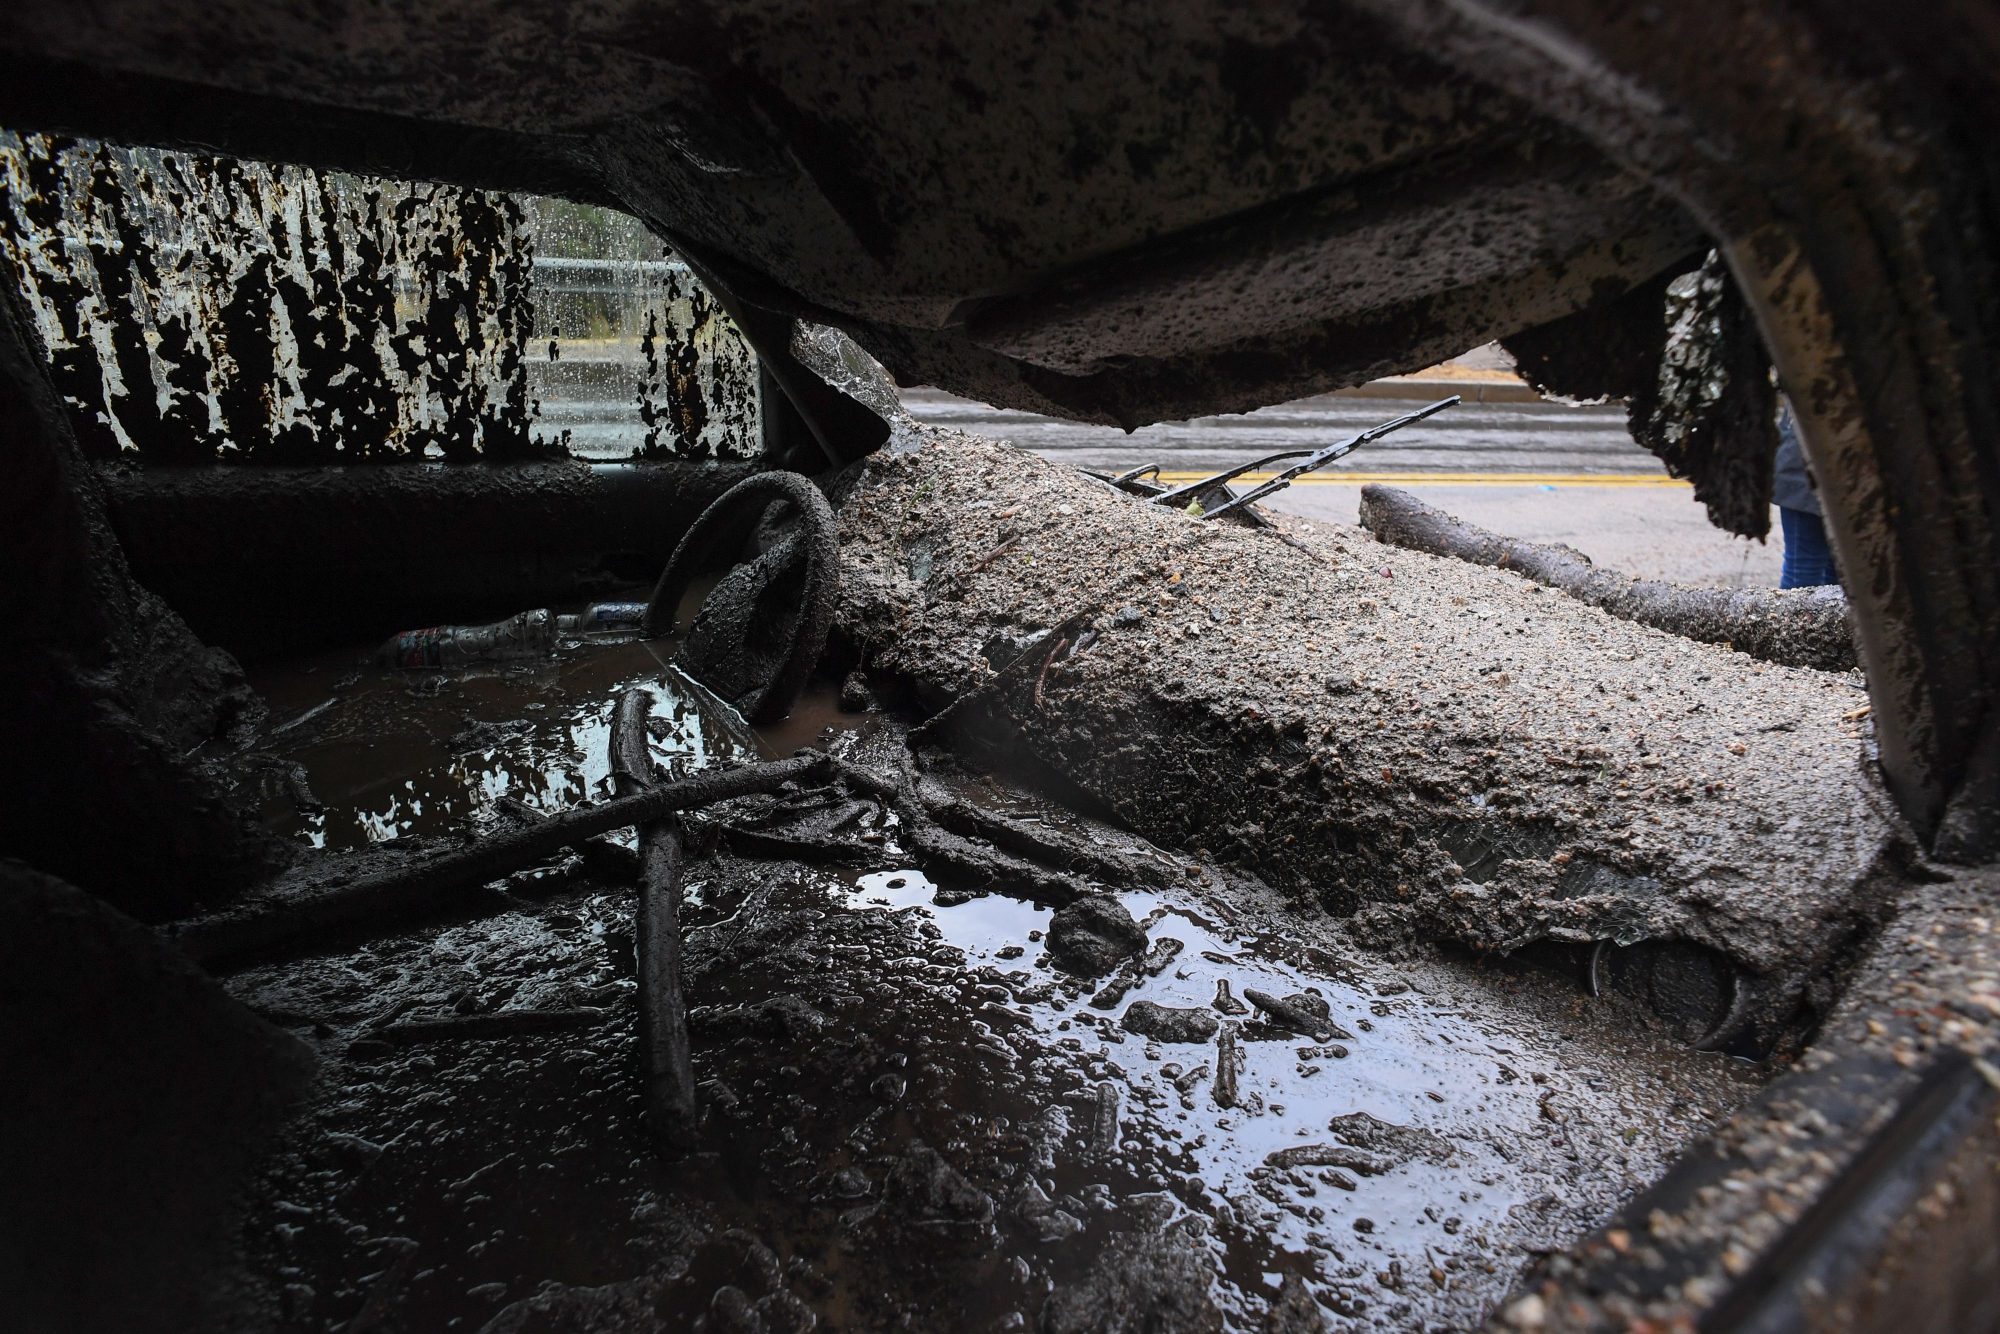 TOPSHOT - Mud fills the interior of a car destroyed in a rain-driven mudslide in a neighborhood under mandatory evacuation in Burbank, California, January 9, 2018.                      Mudslides unleashed by a ferocious storm demolished homes in southern California, authorities said Tuesday. Five people were reported killed.